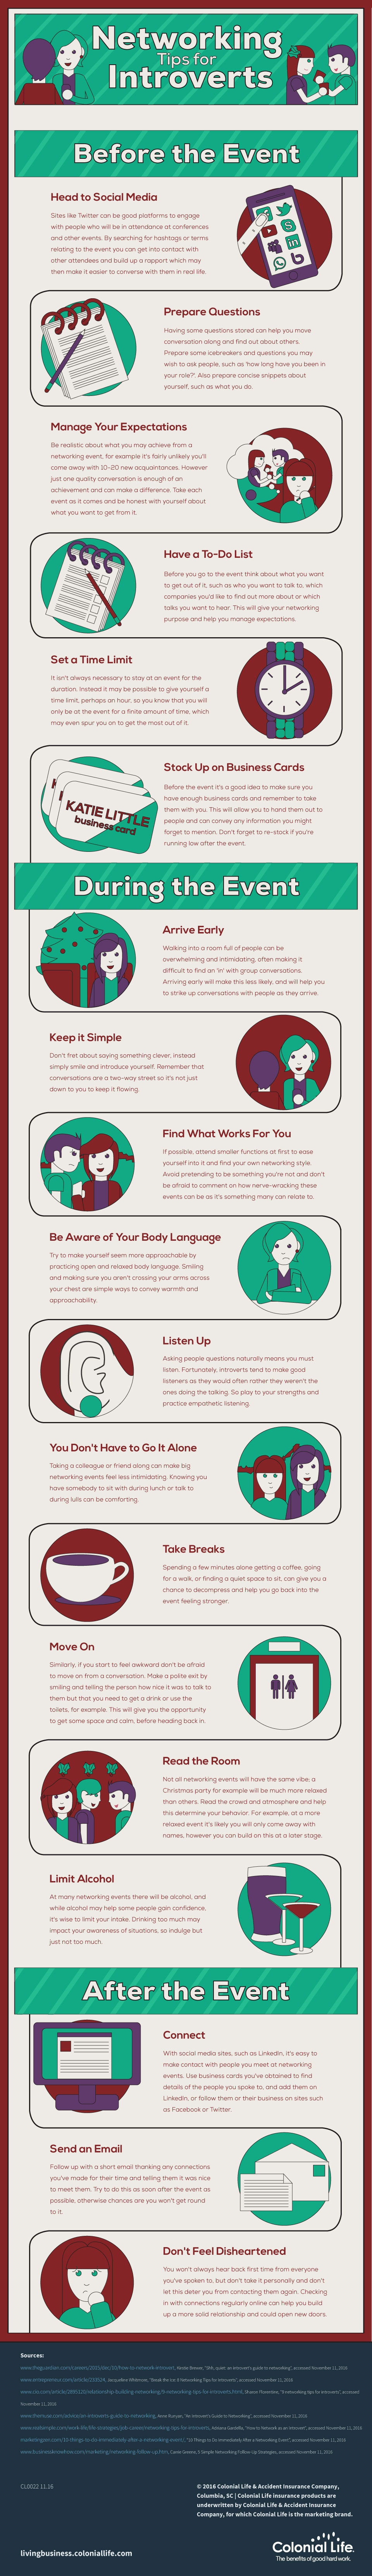 Networking Tips for Introverts